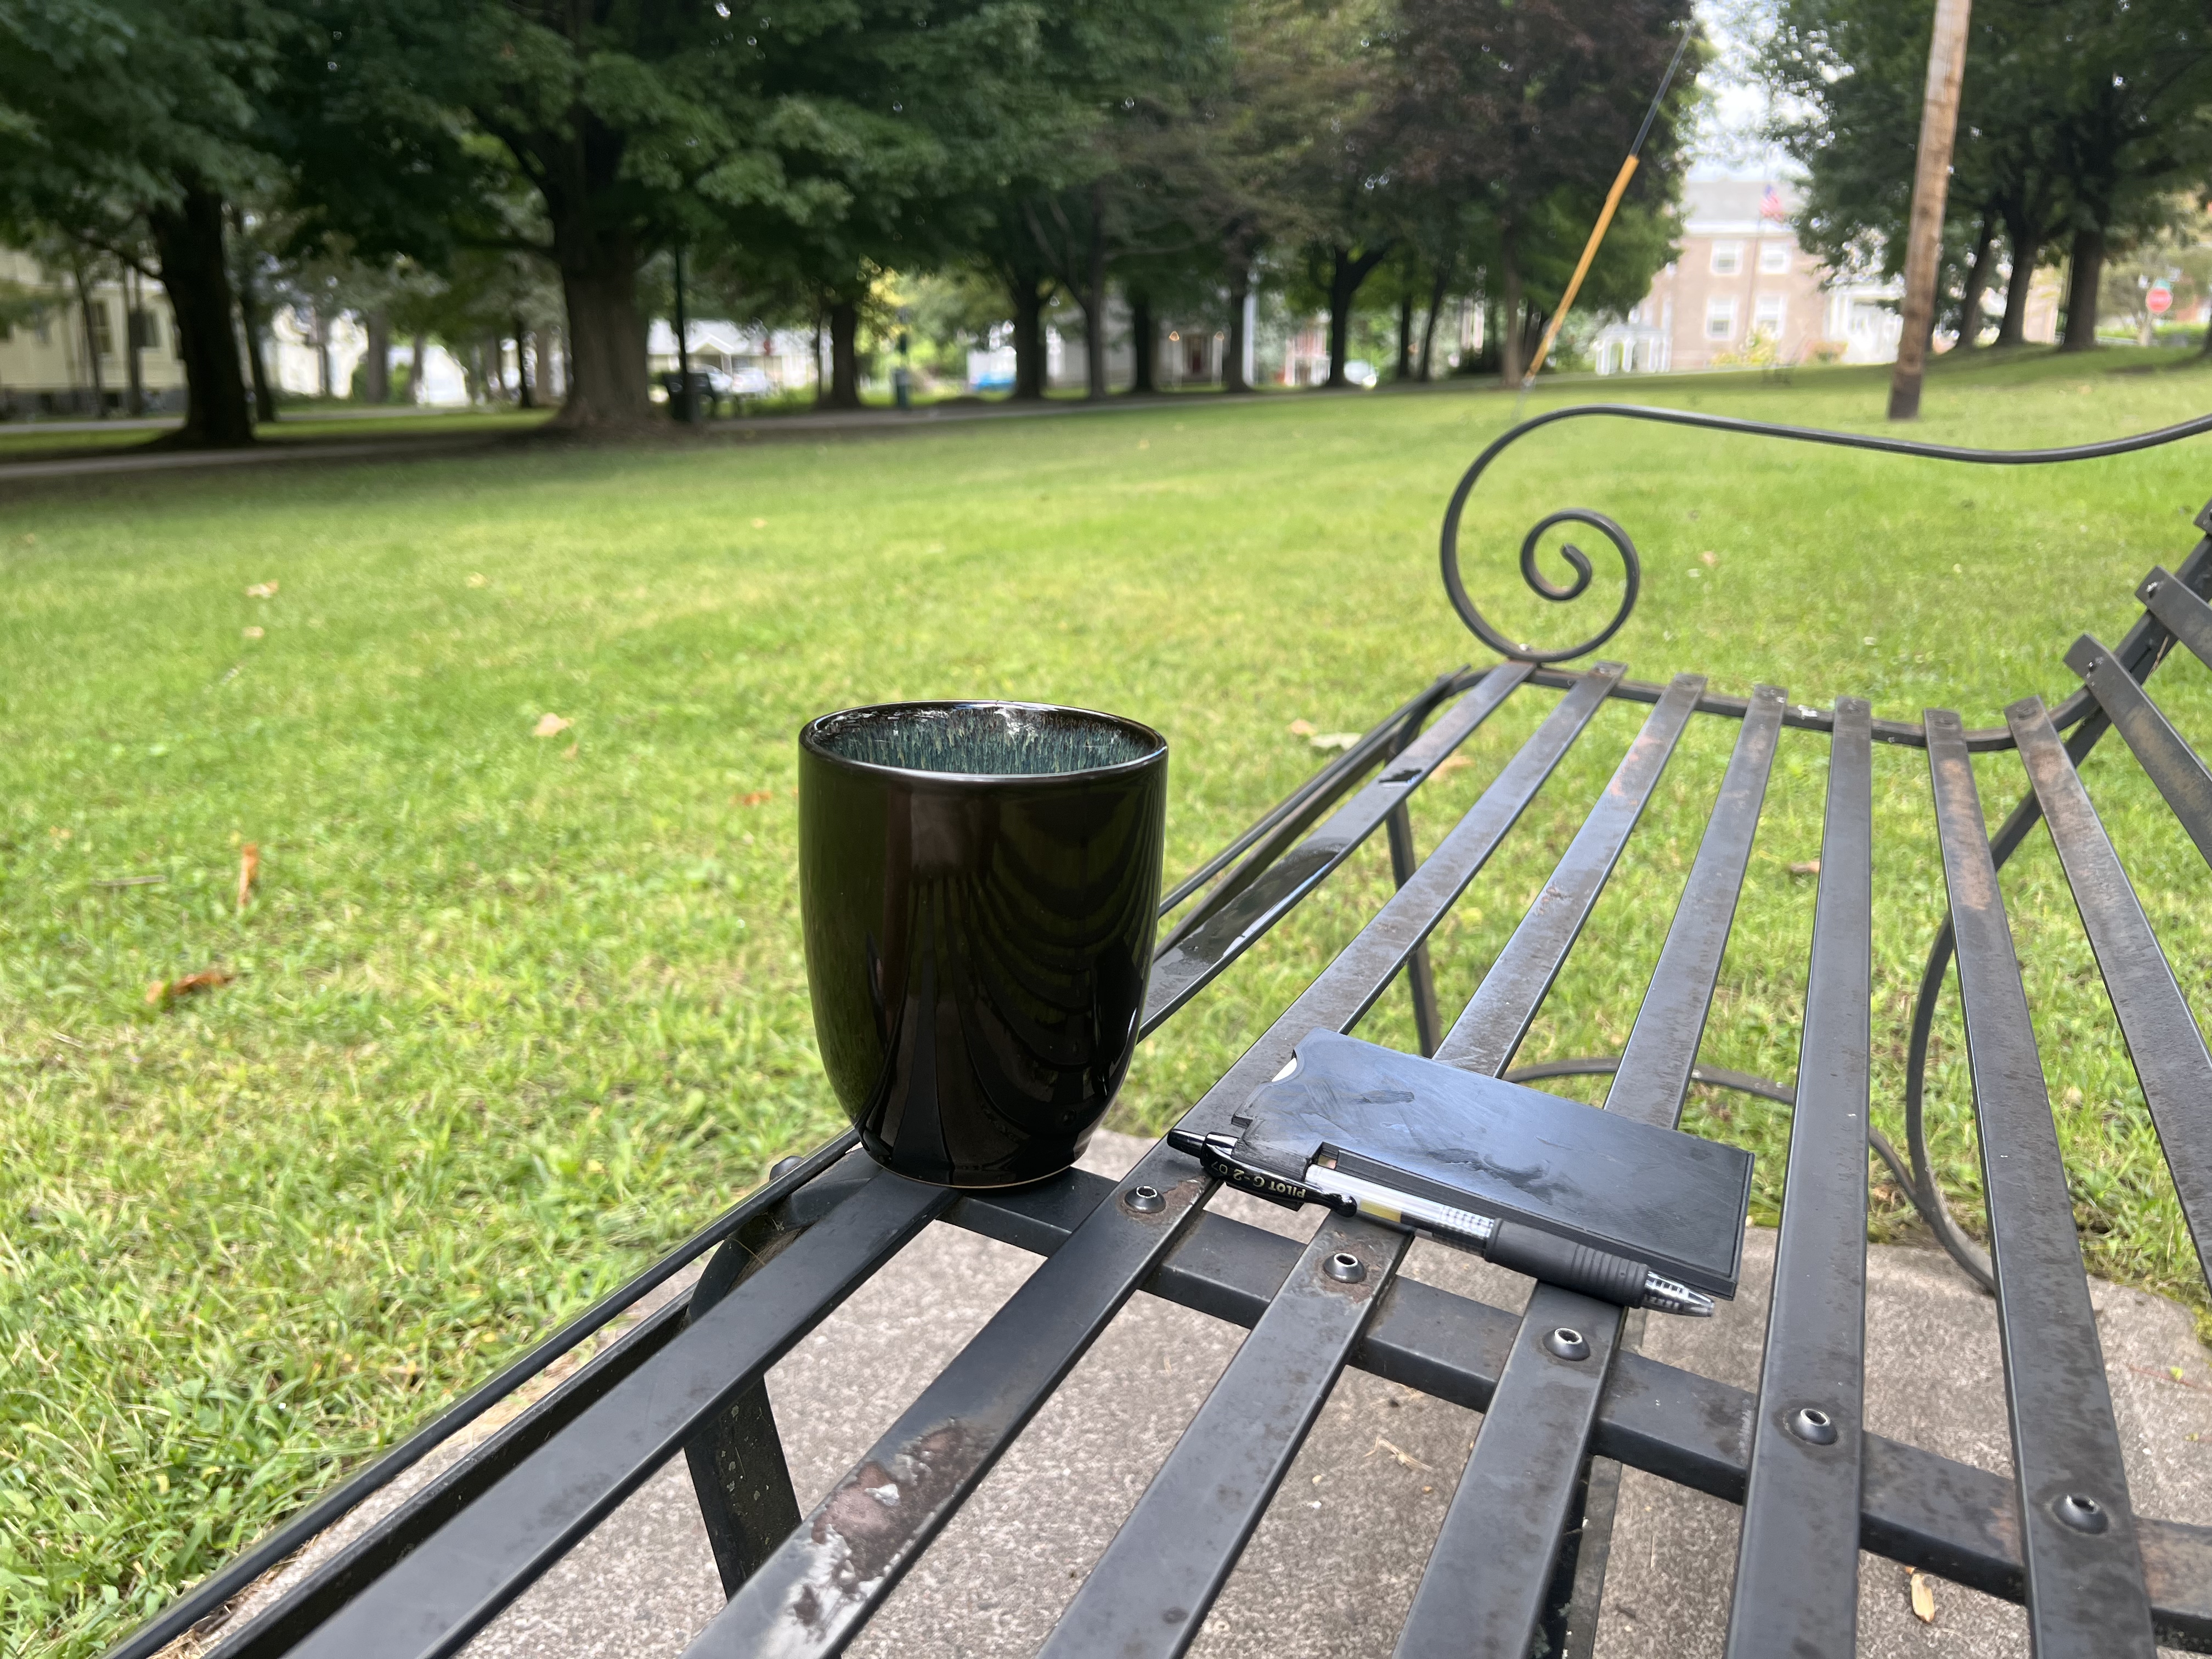 Coffee mug on a park bench with leafy trees in the background